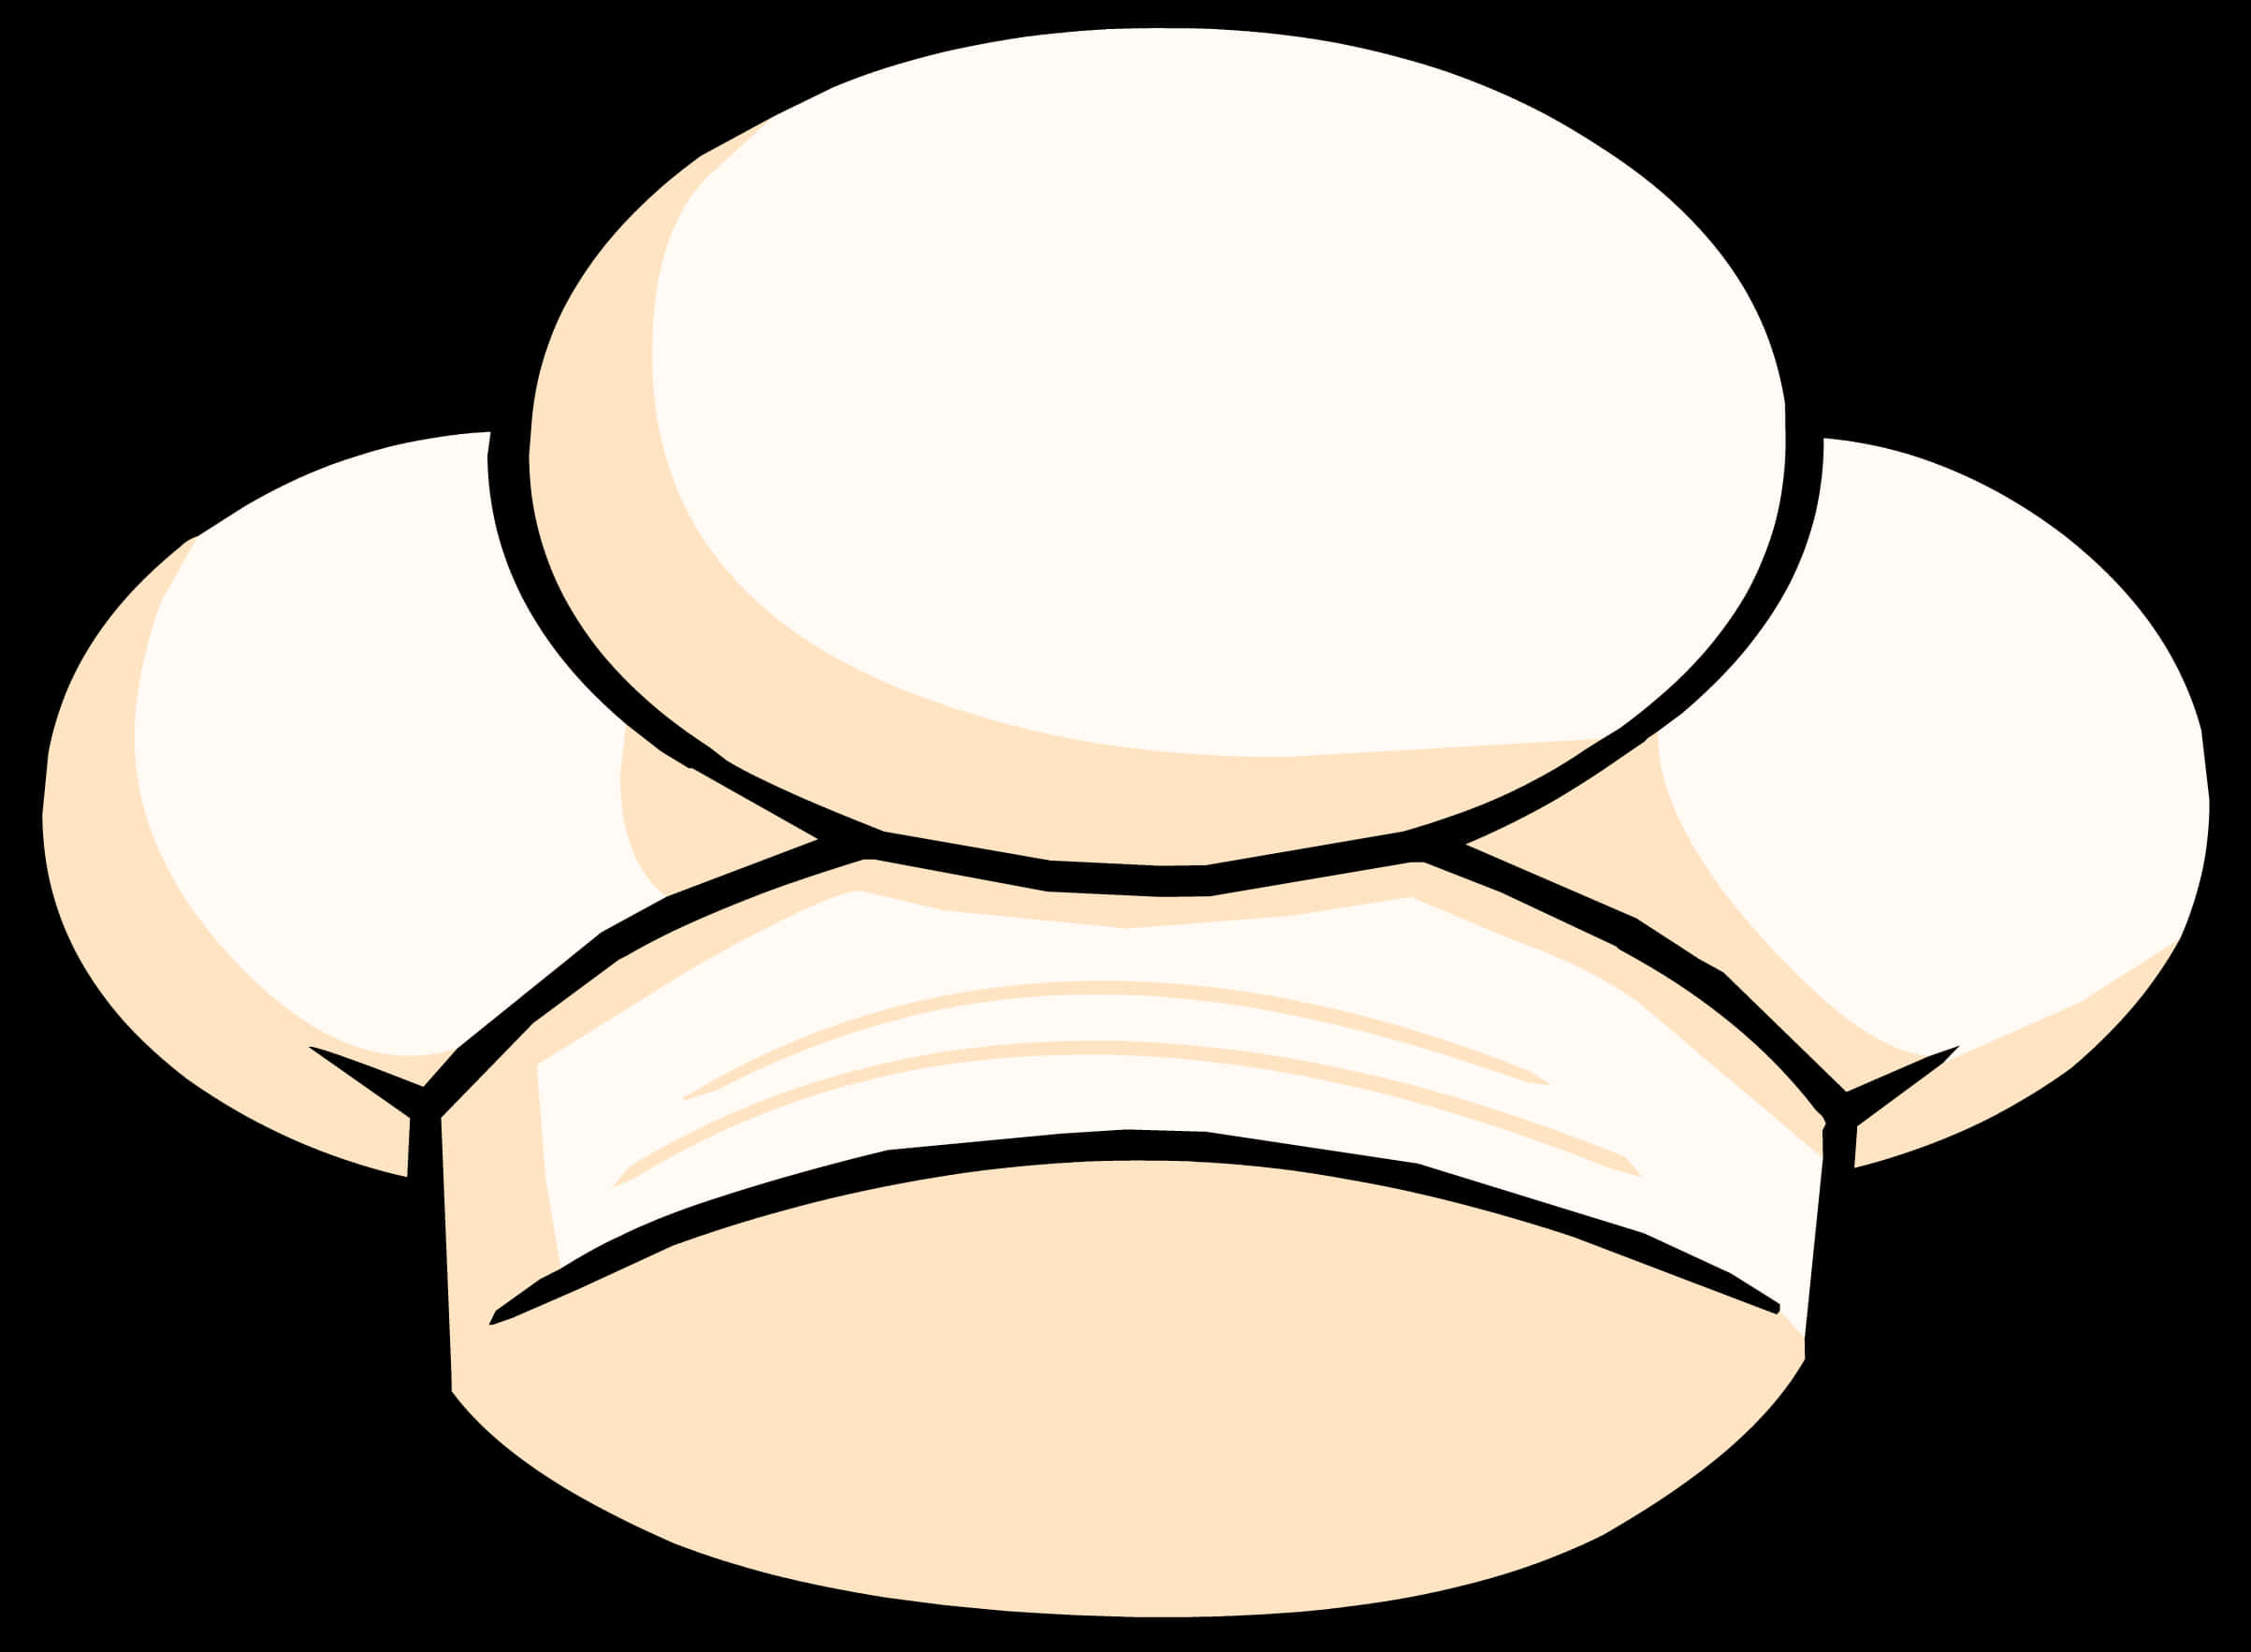 A Cartoon Of A Chef's Hat